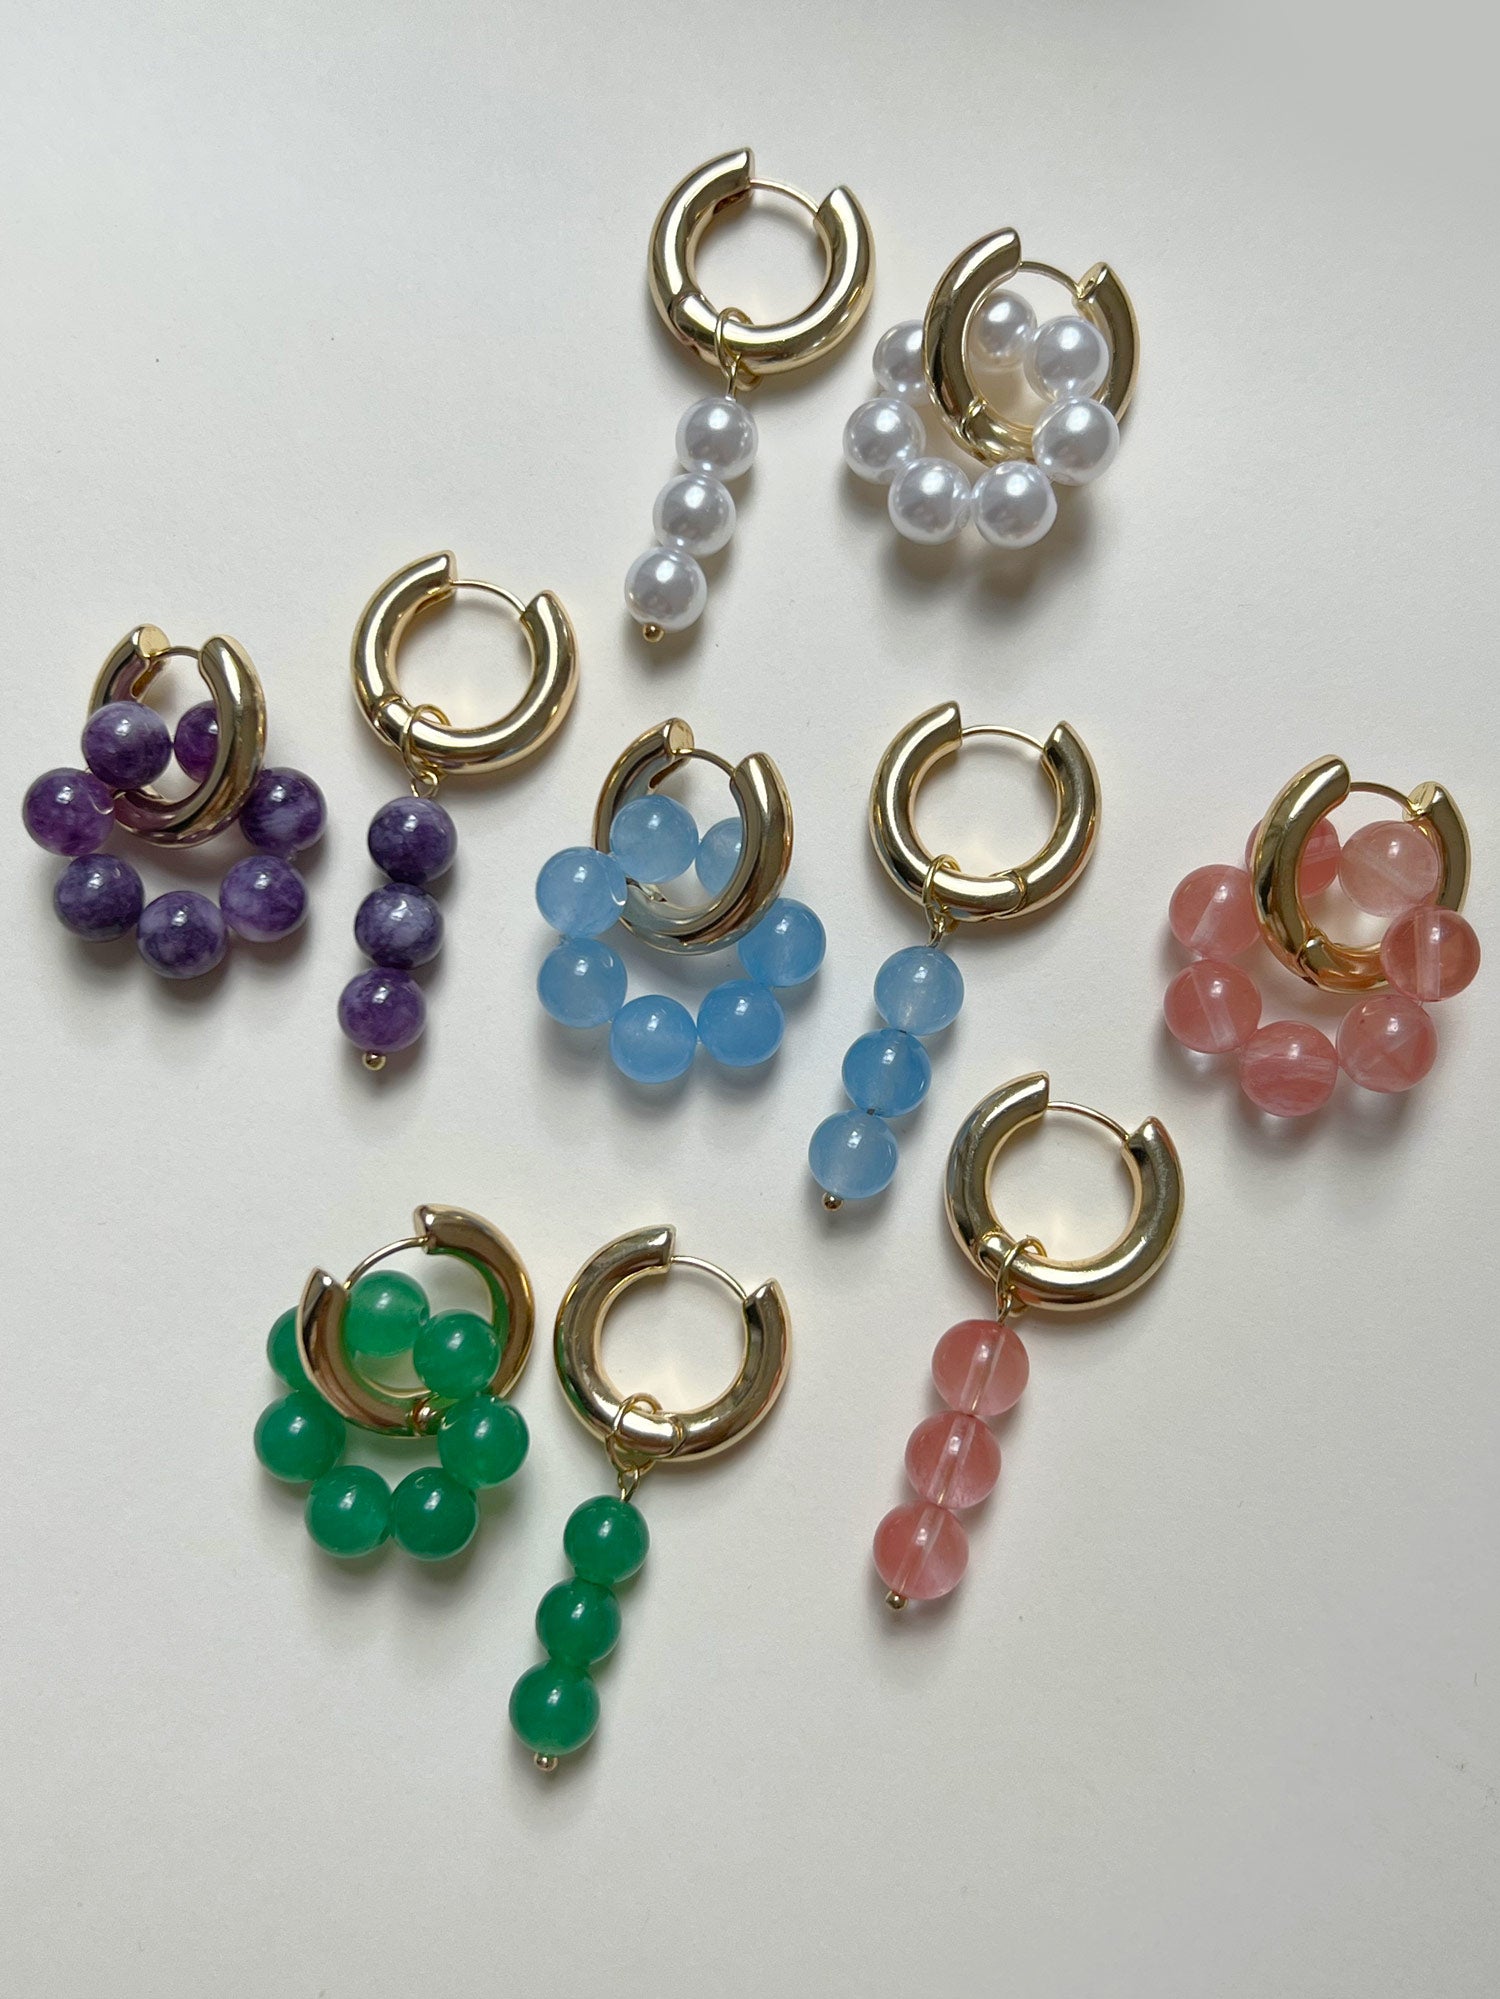 Asymmetrical Hoops with Natural Stones - Green